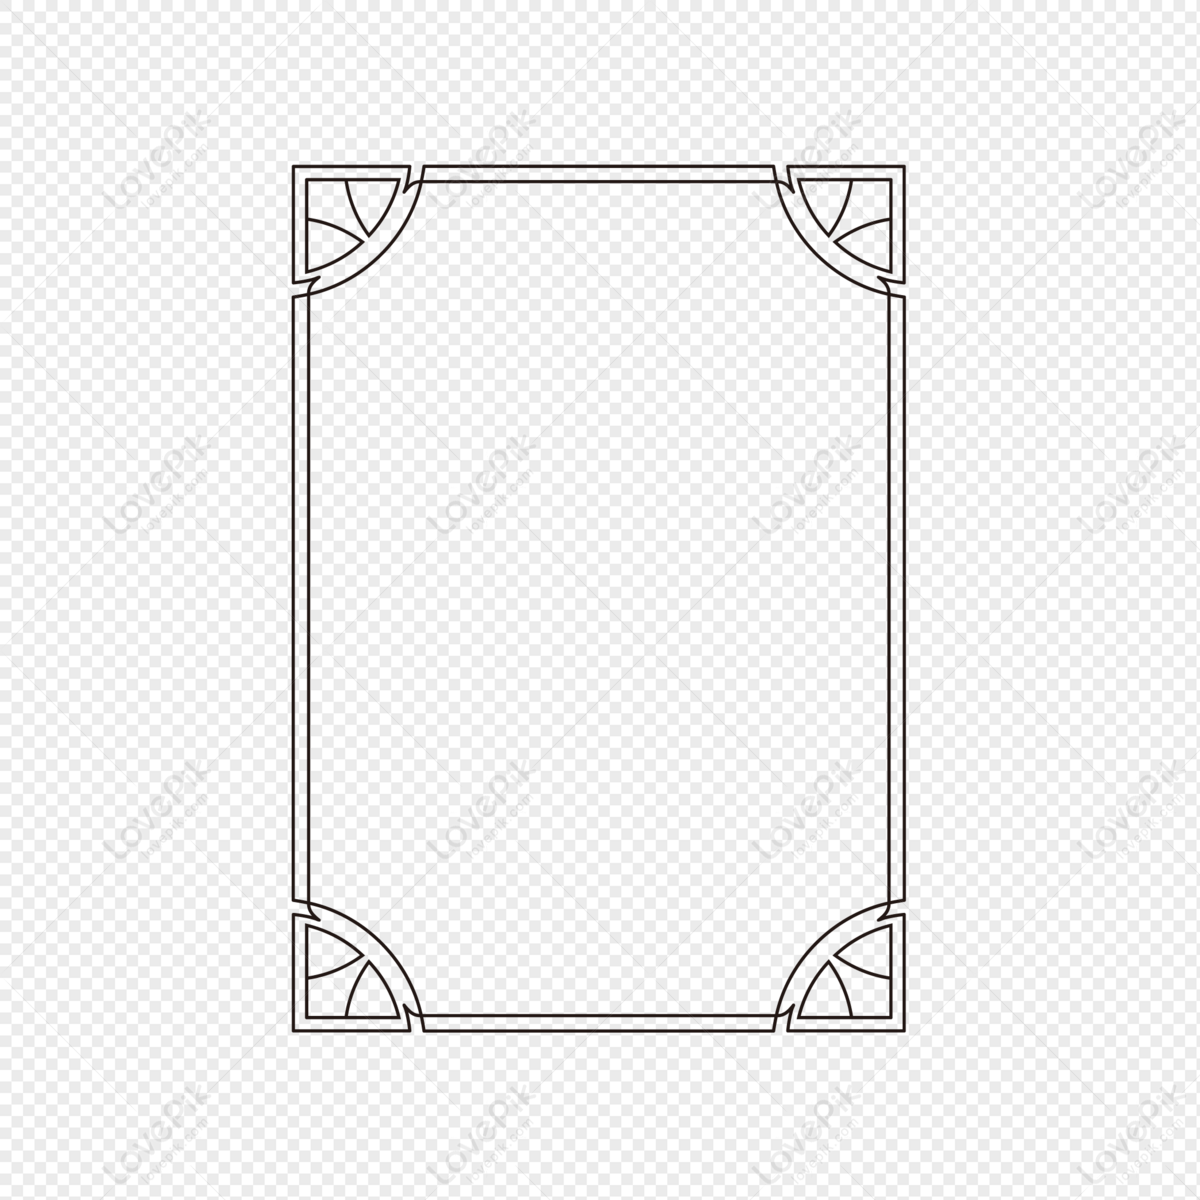 Pattern Border, Classic, Vector, Pattern PNG Image Free Download And ...